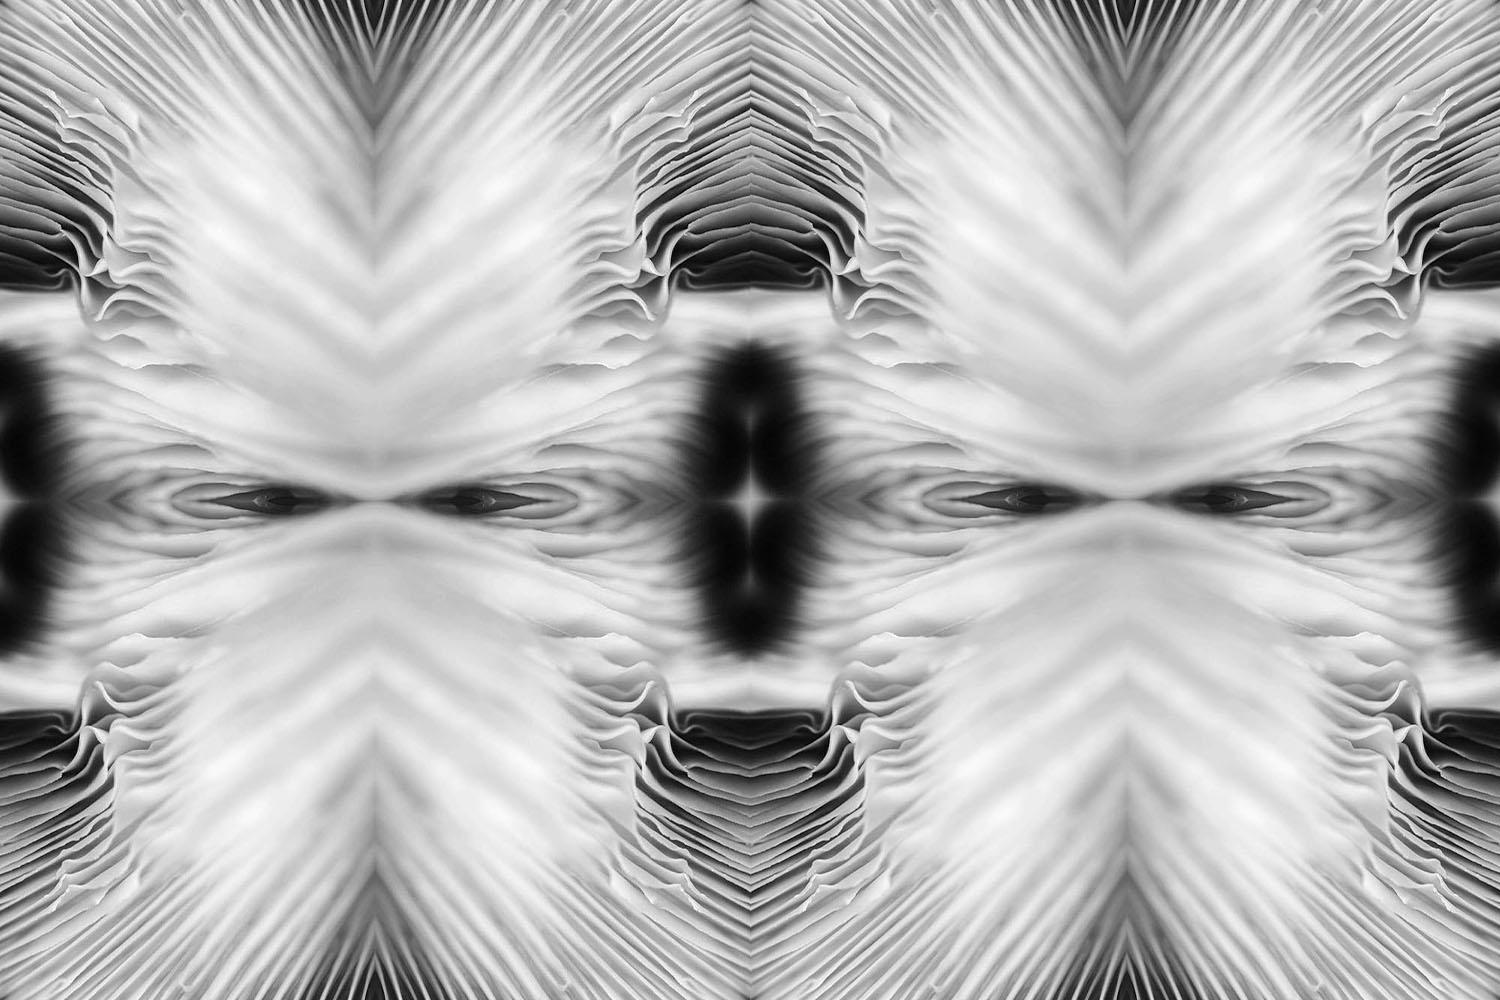 Mushroom gill abstract pattern black and white artwork.